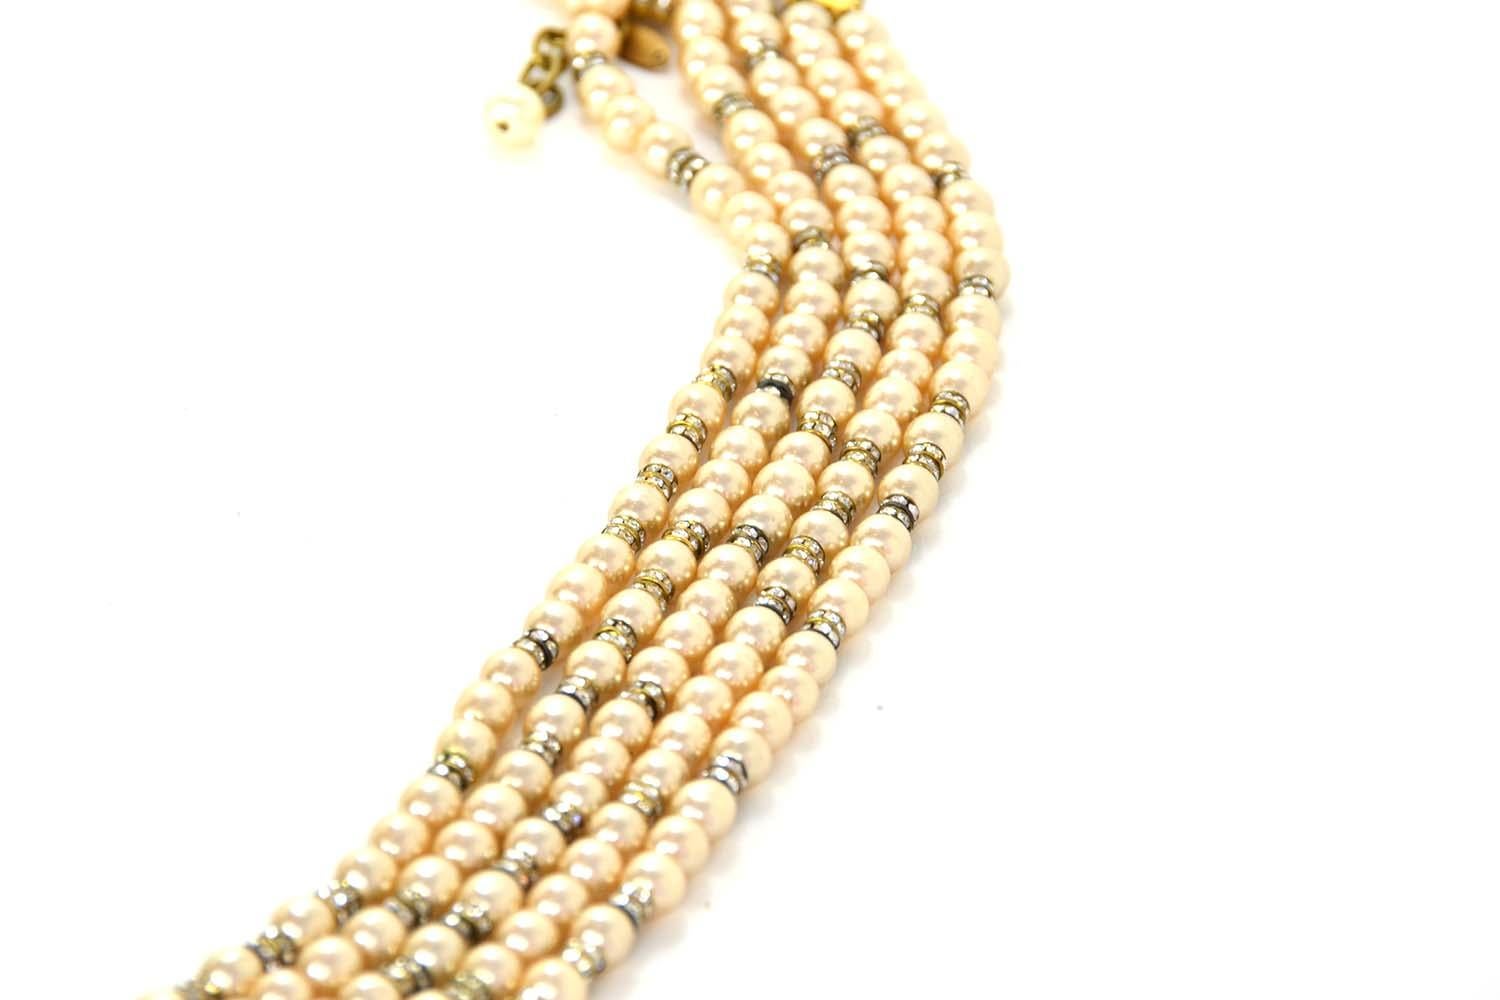 Chanel Vintage 1990s Multi-Strand Faux Pearl & Crystal Rondelle Necklace For Sale 1